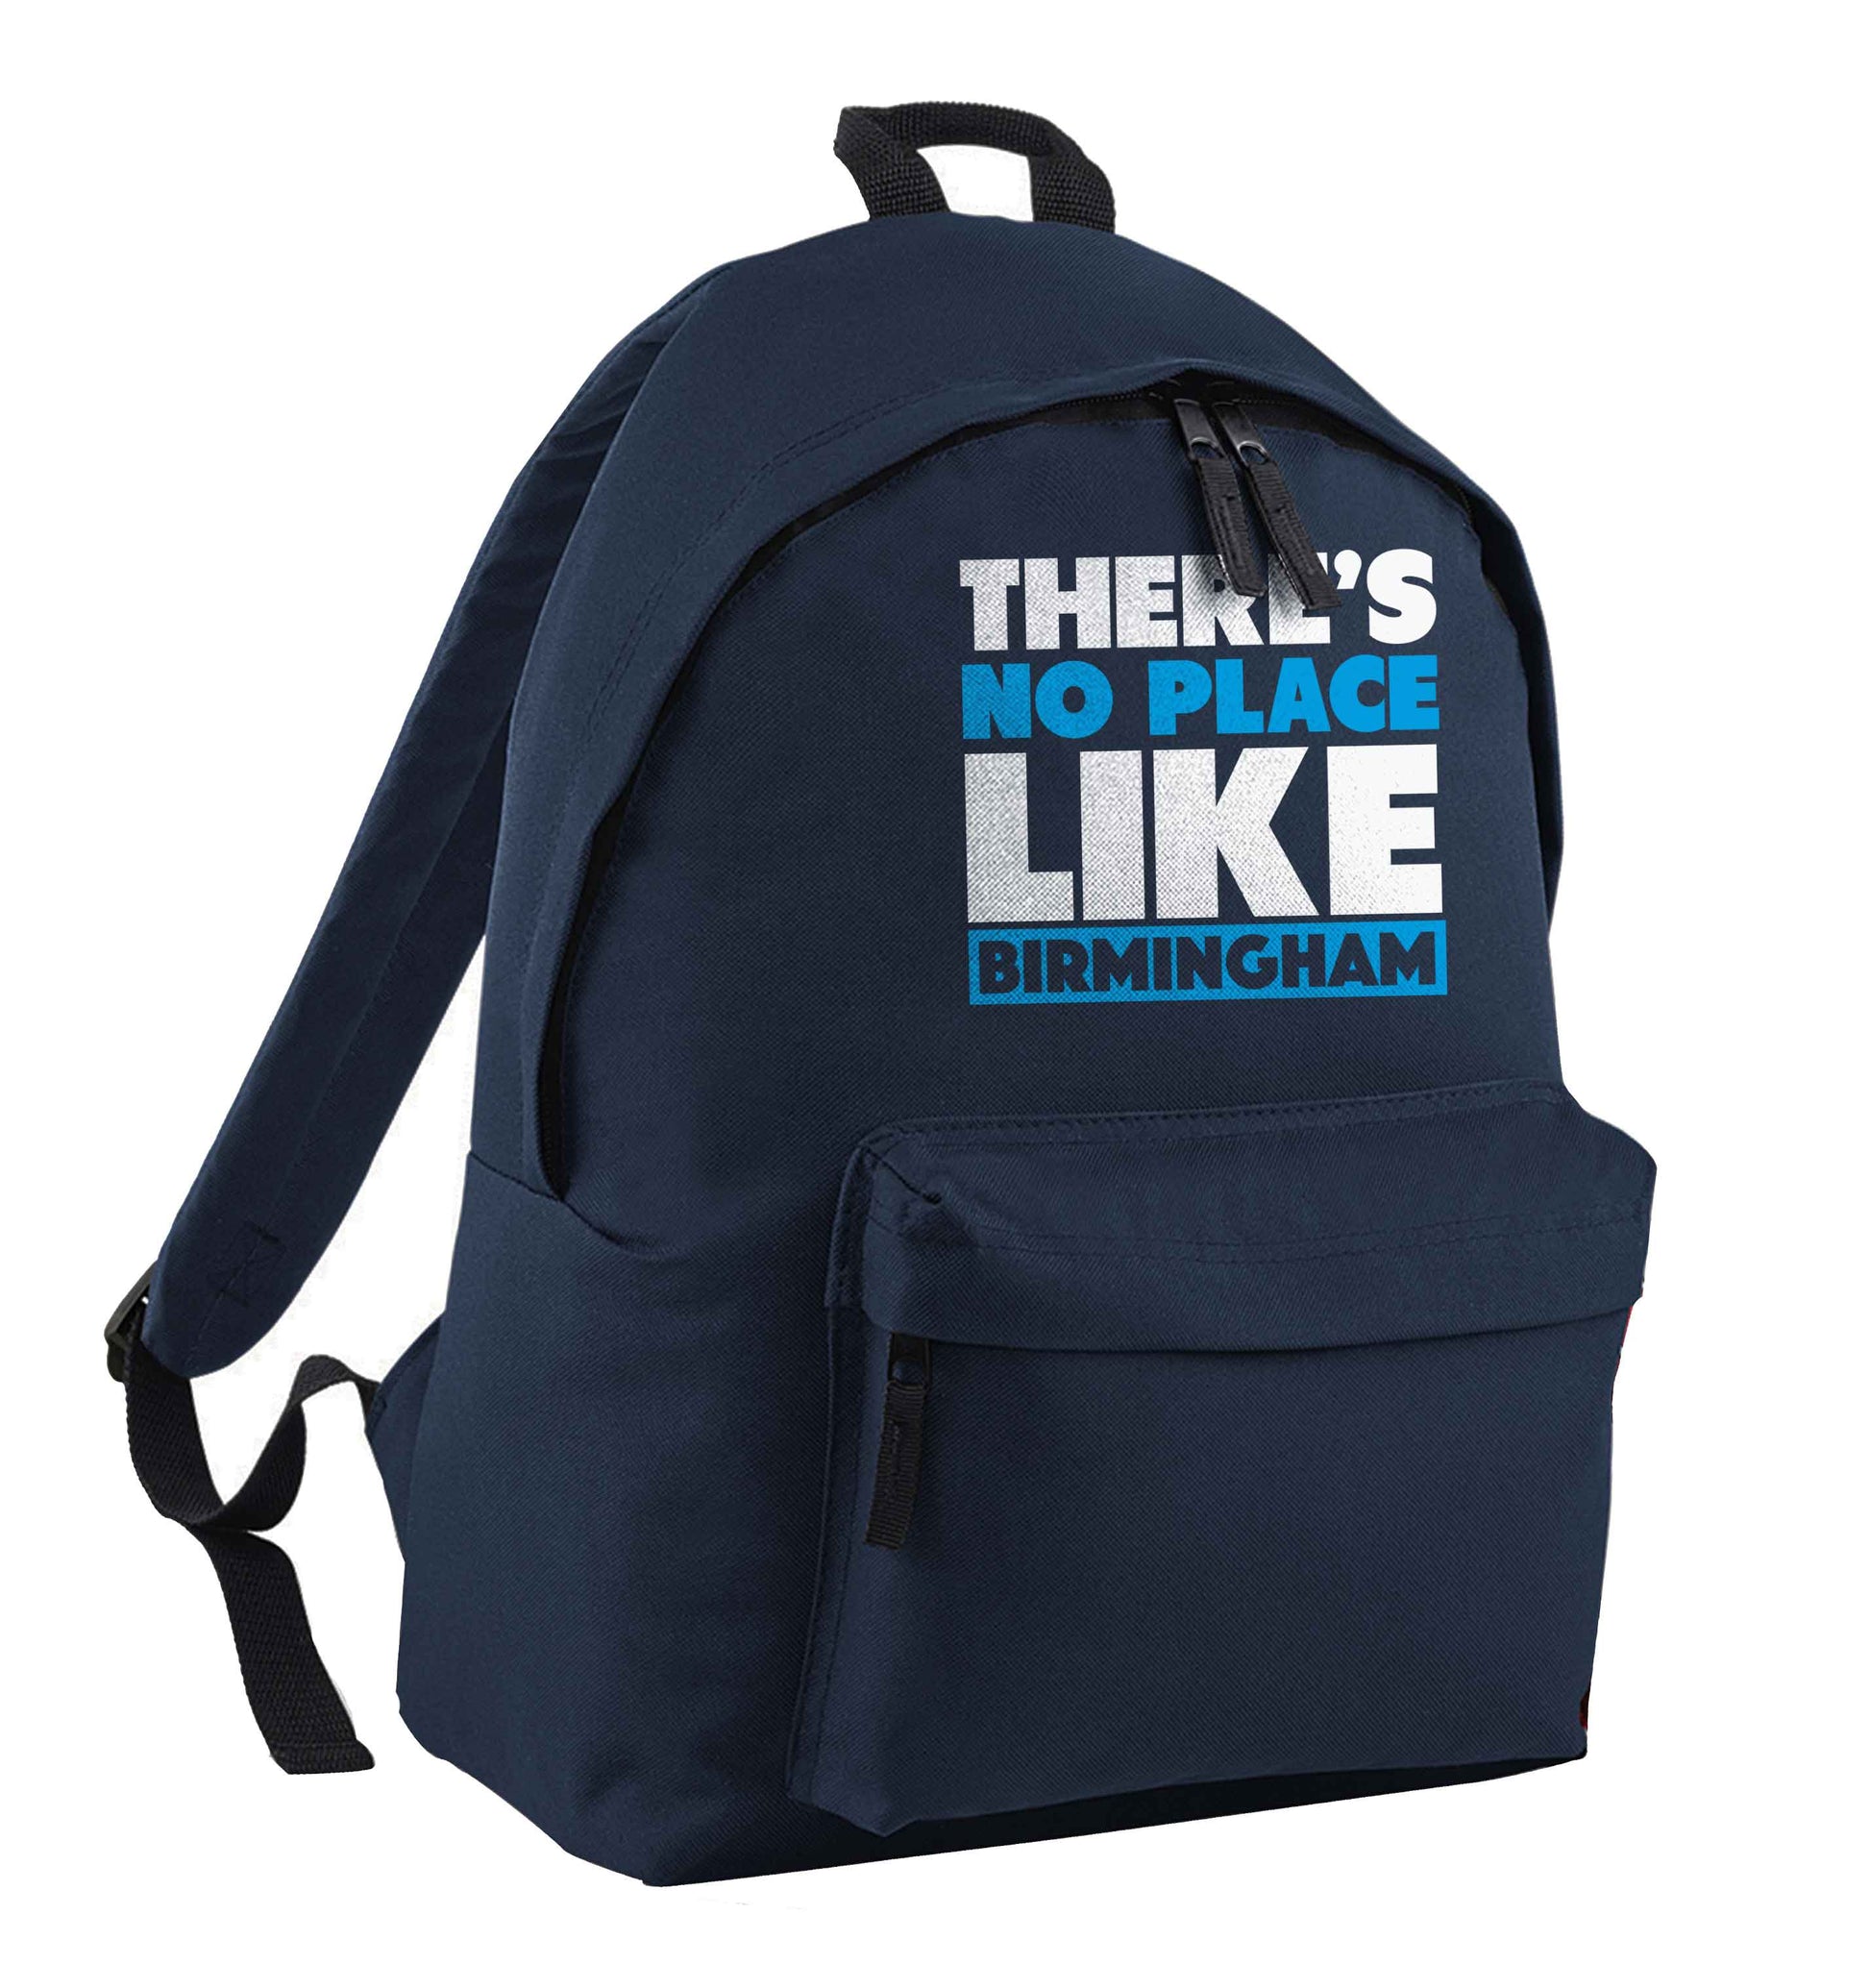 There's no place like Birmingham navy children's backpack